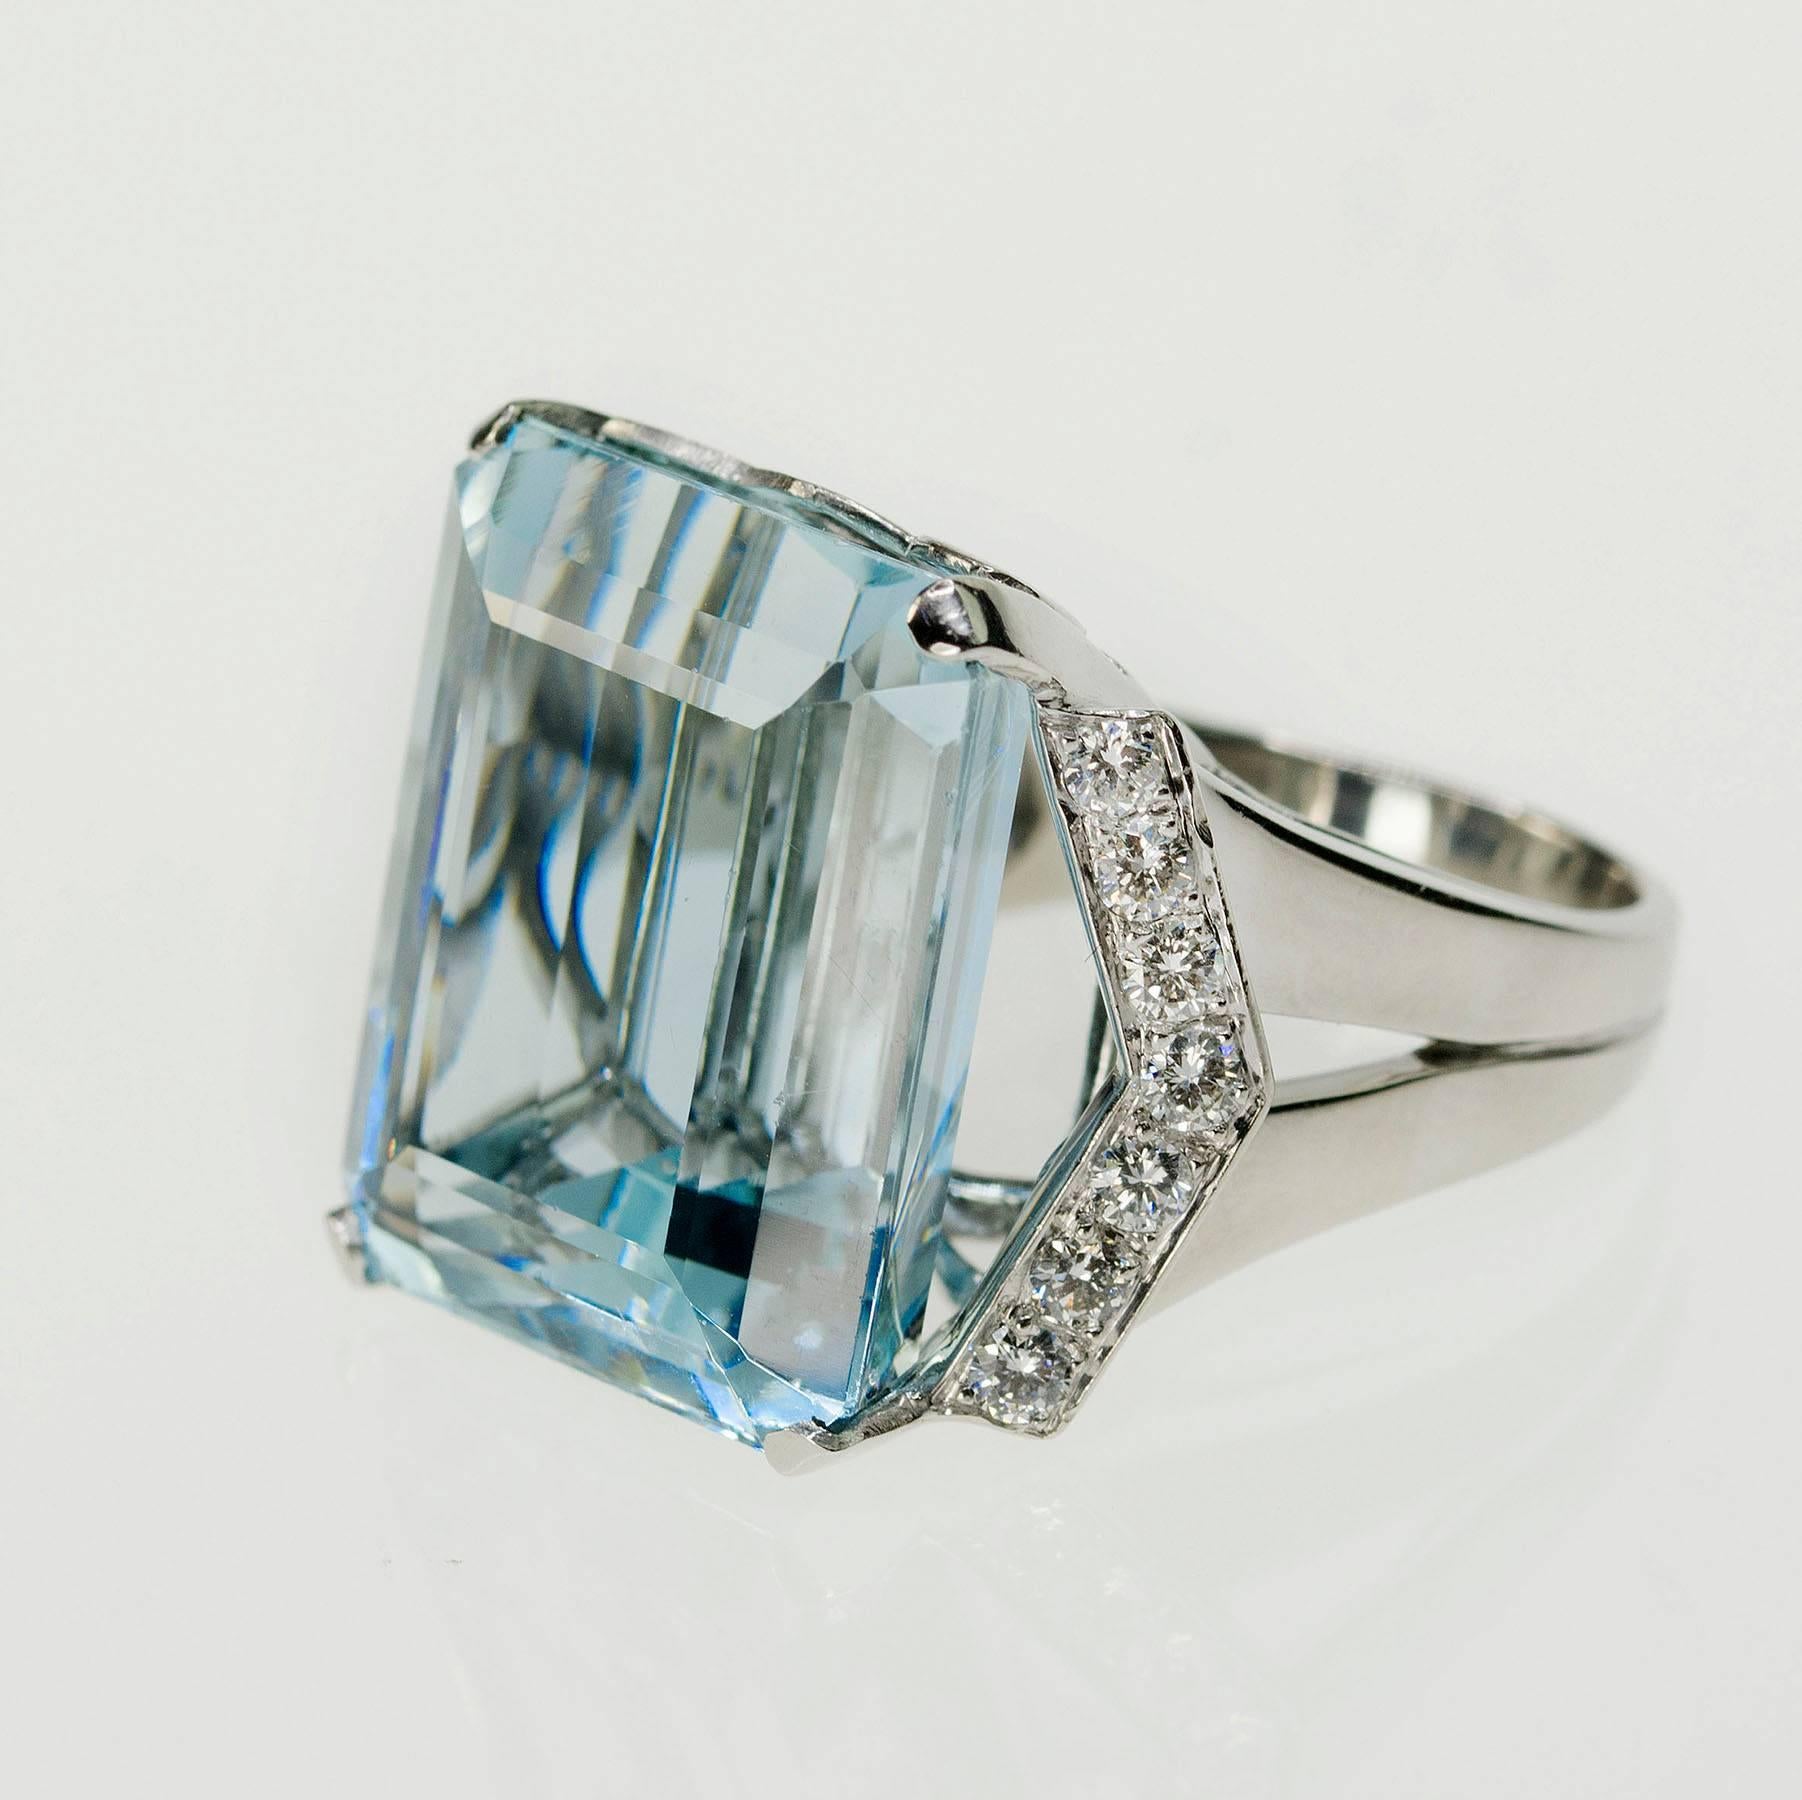 Beautiful hand fabricated platinum Ring with 35,24 Carat Aquamarine and 14 round brilliant diamonds weighing approximately 1.20 carats.